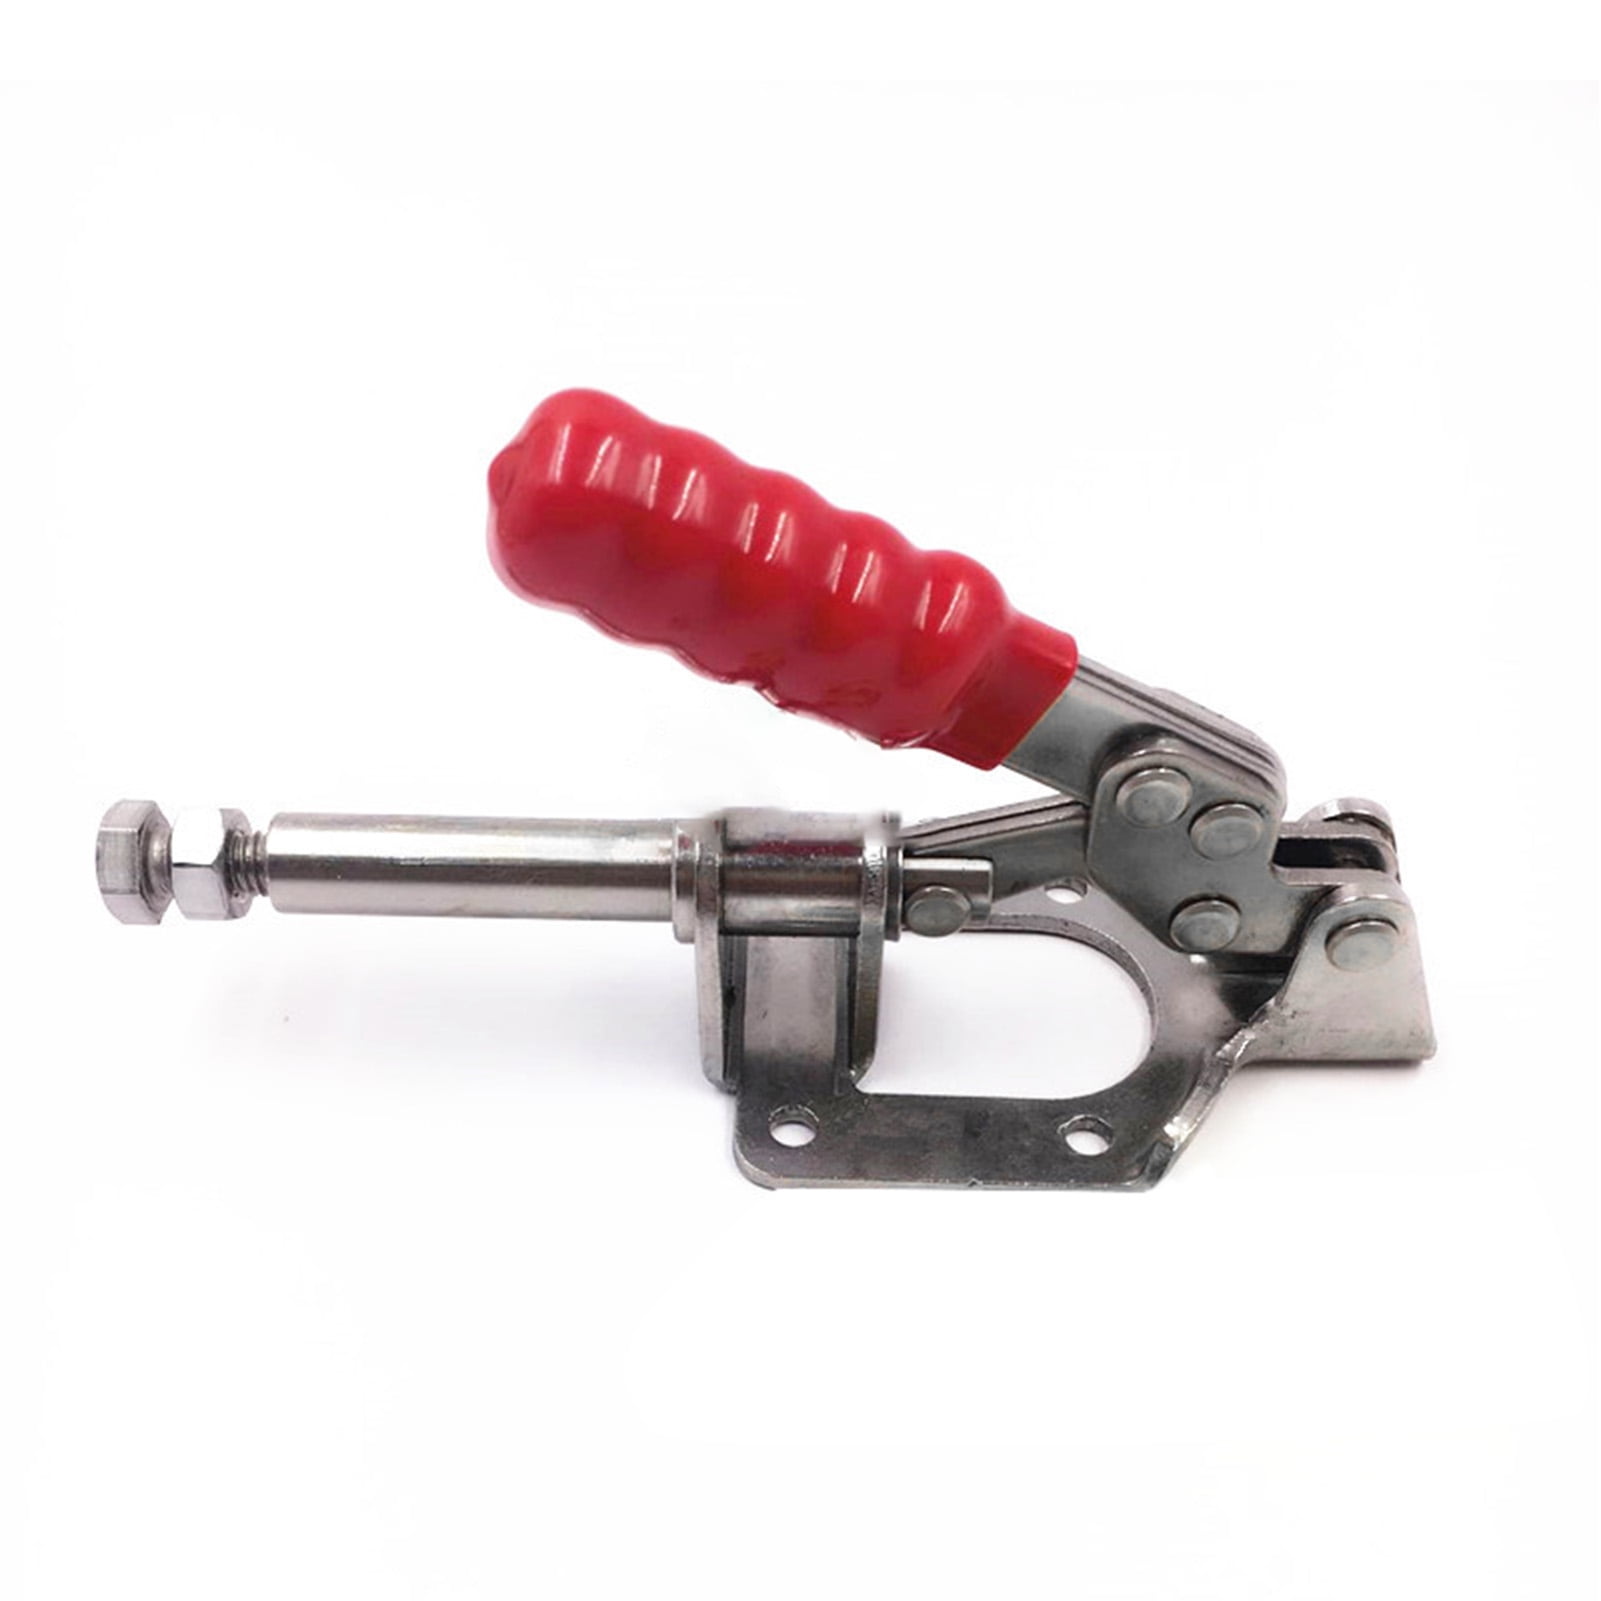 Plastic Wrapped Handle Hold Down Toggle Clamps Saving Time And Effort Heavy Duty Toggle Clamp 